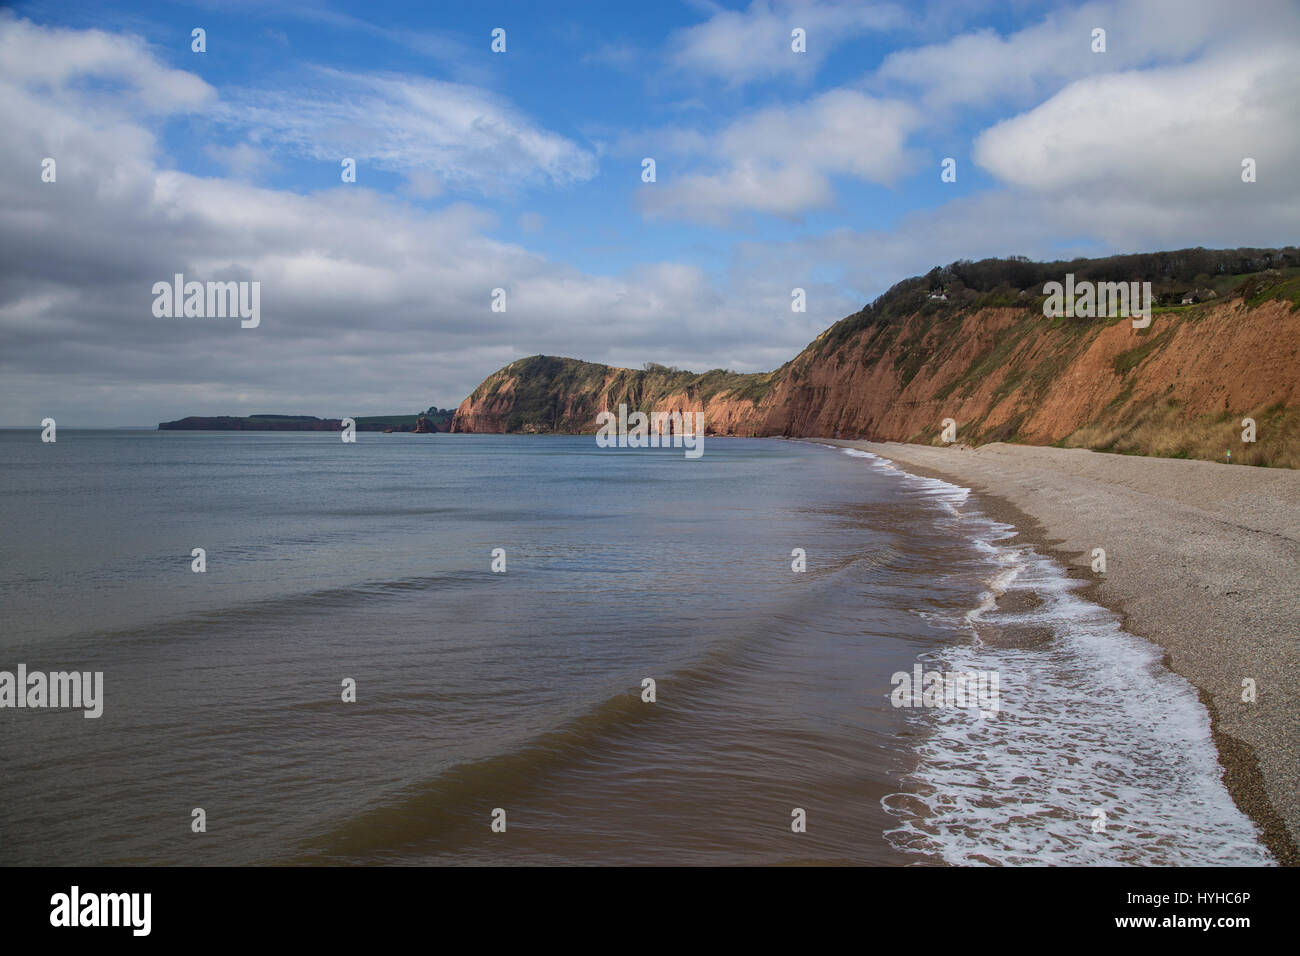 View of the west beach at Sidmouth,Devon, with shingle beach and red sandstone cliffs Stock Photo